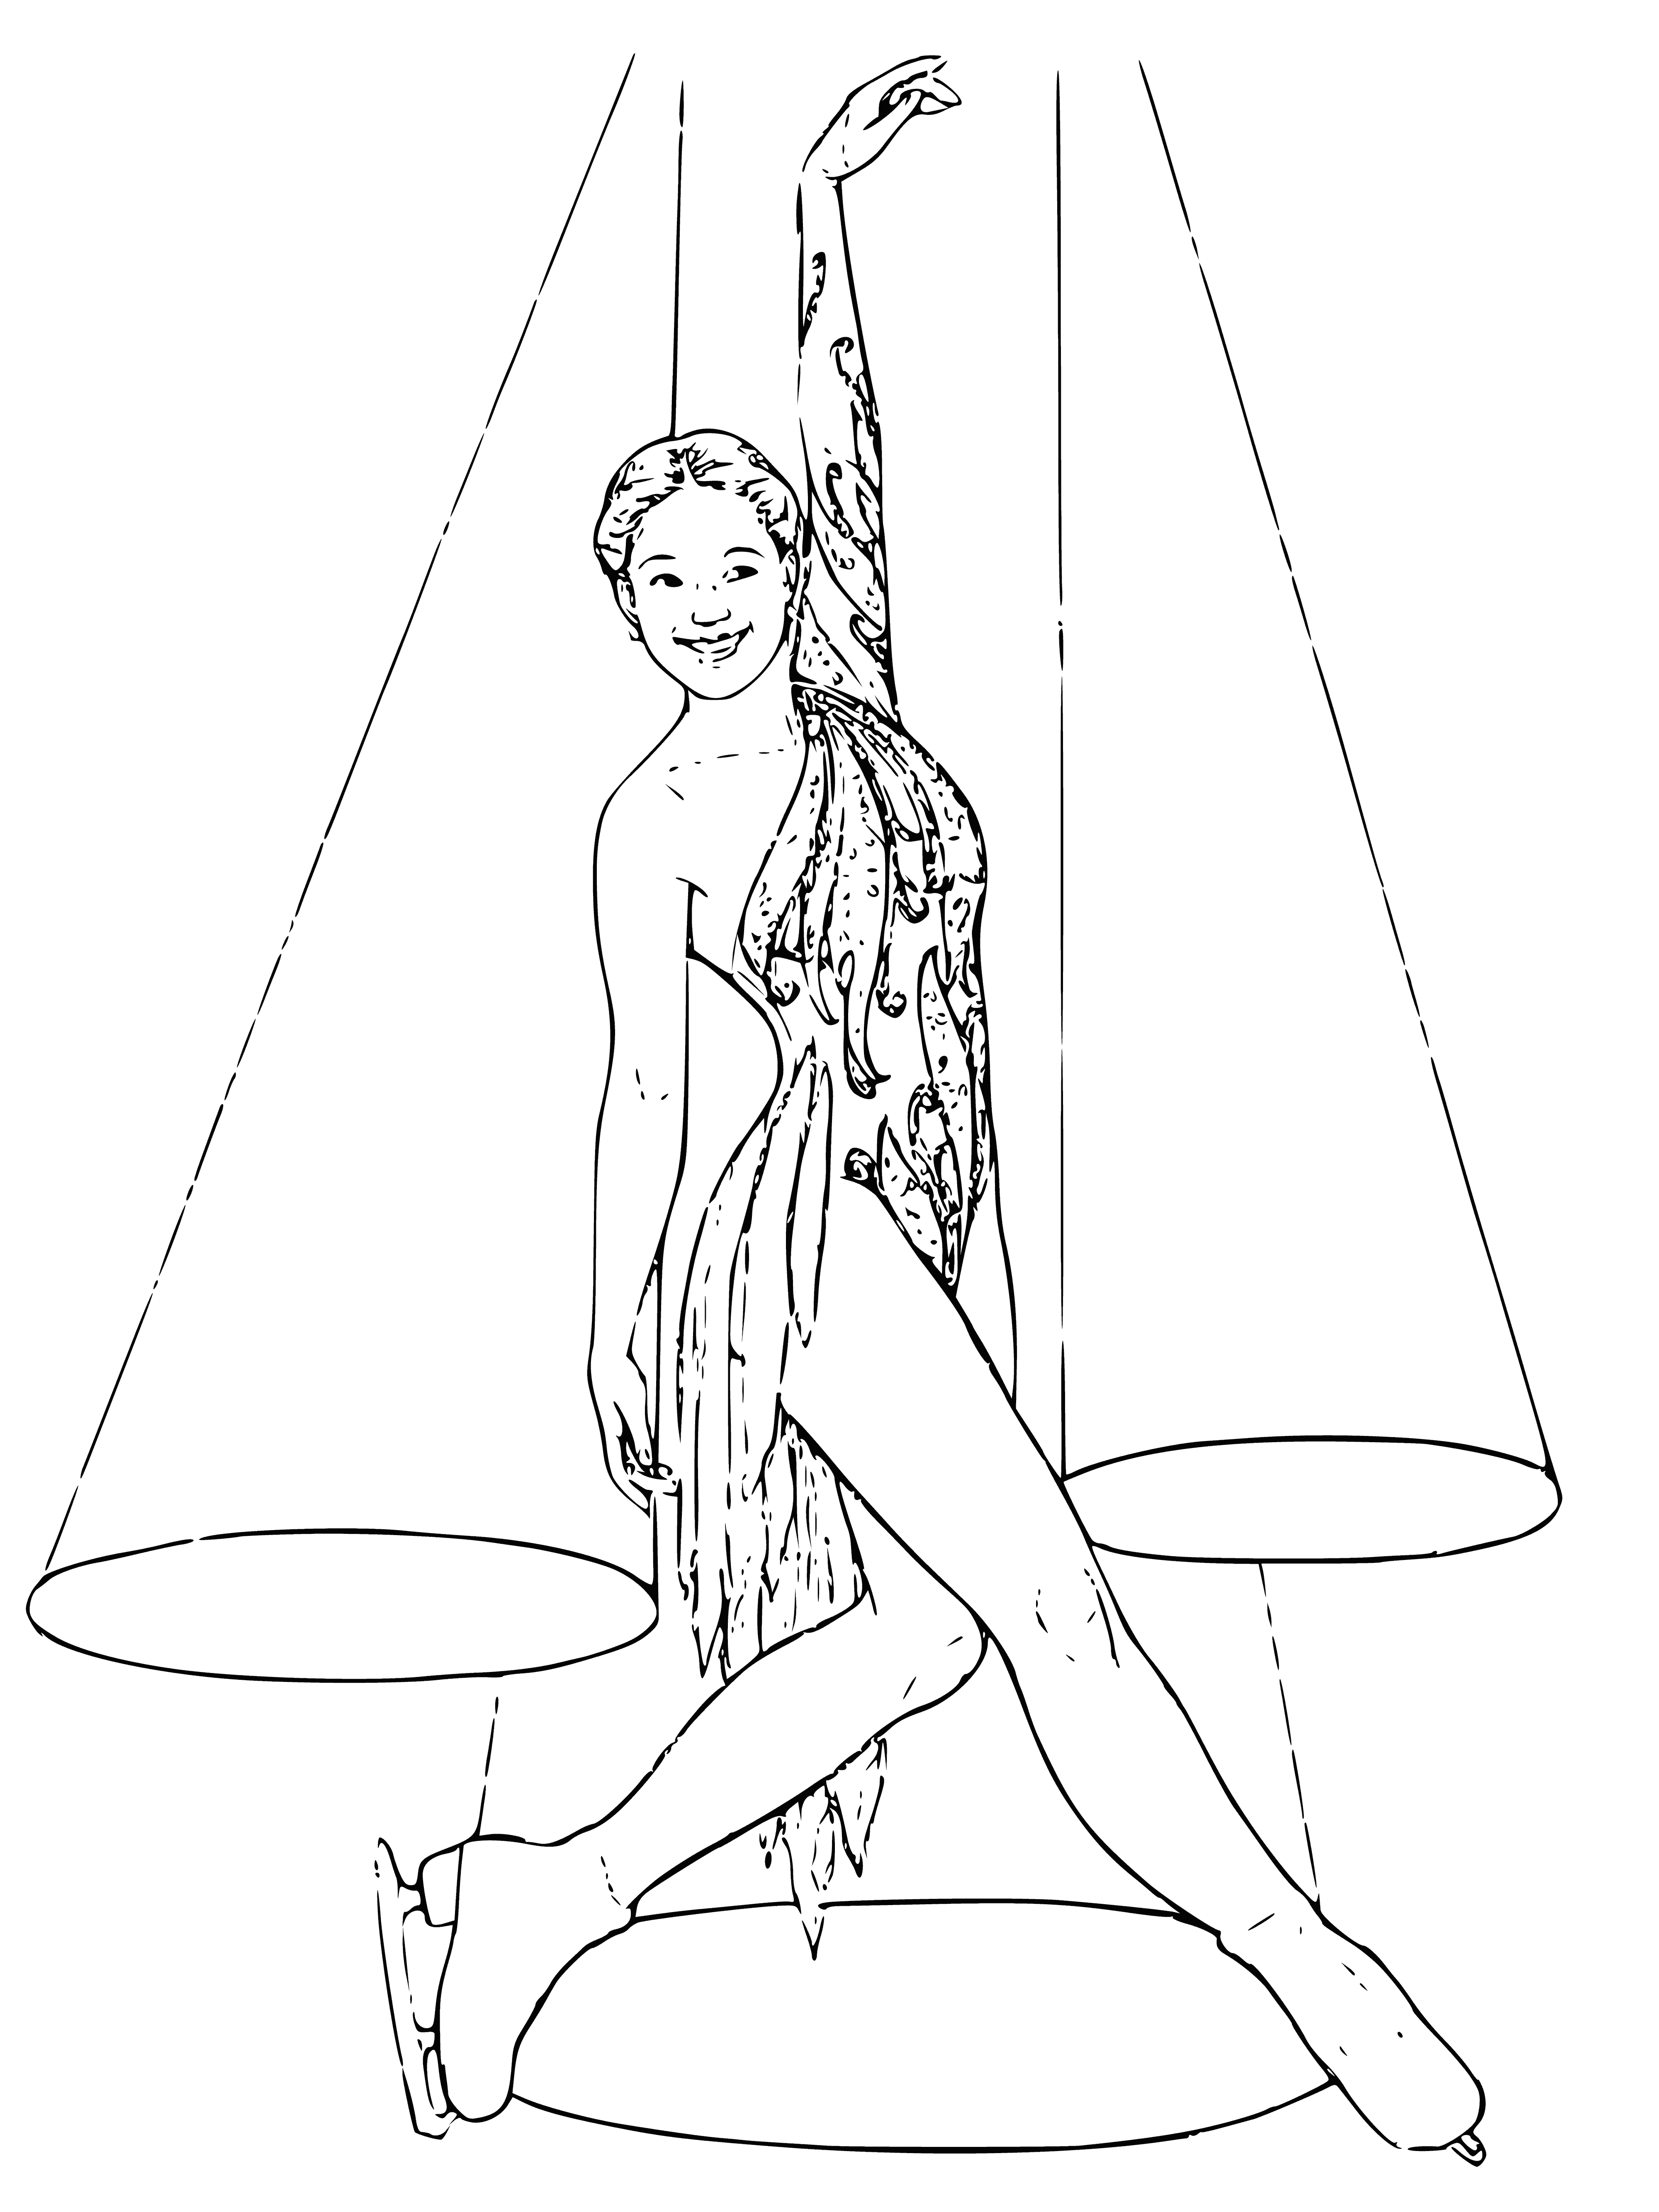 coloring page: Figure skater in blue & silver jumps on frozen pond surrounded by trees.